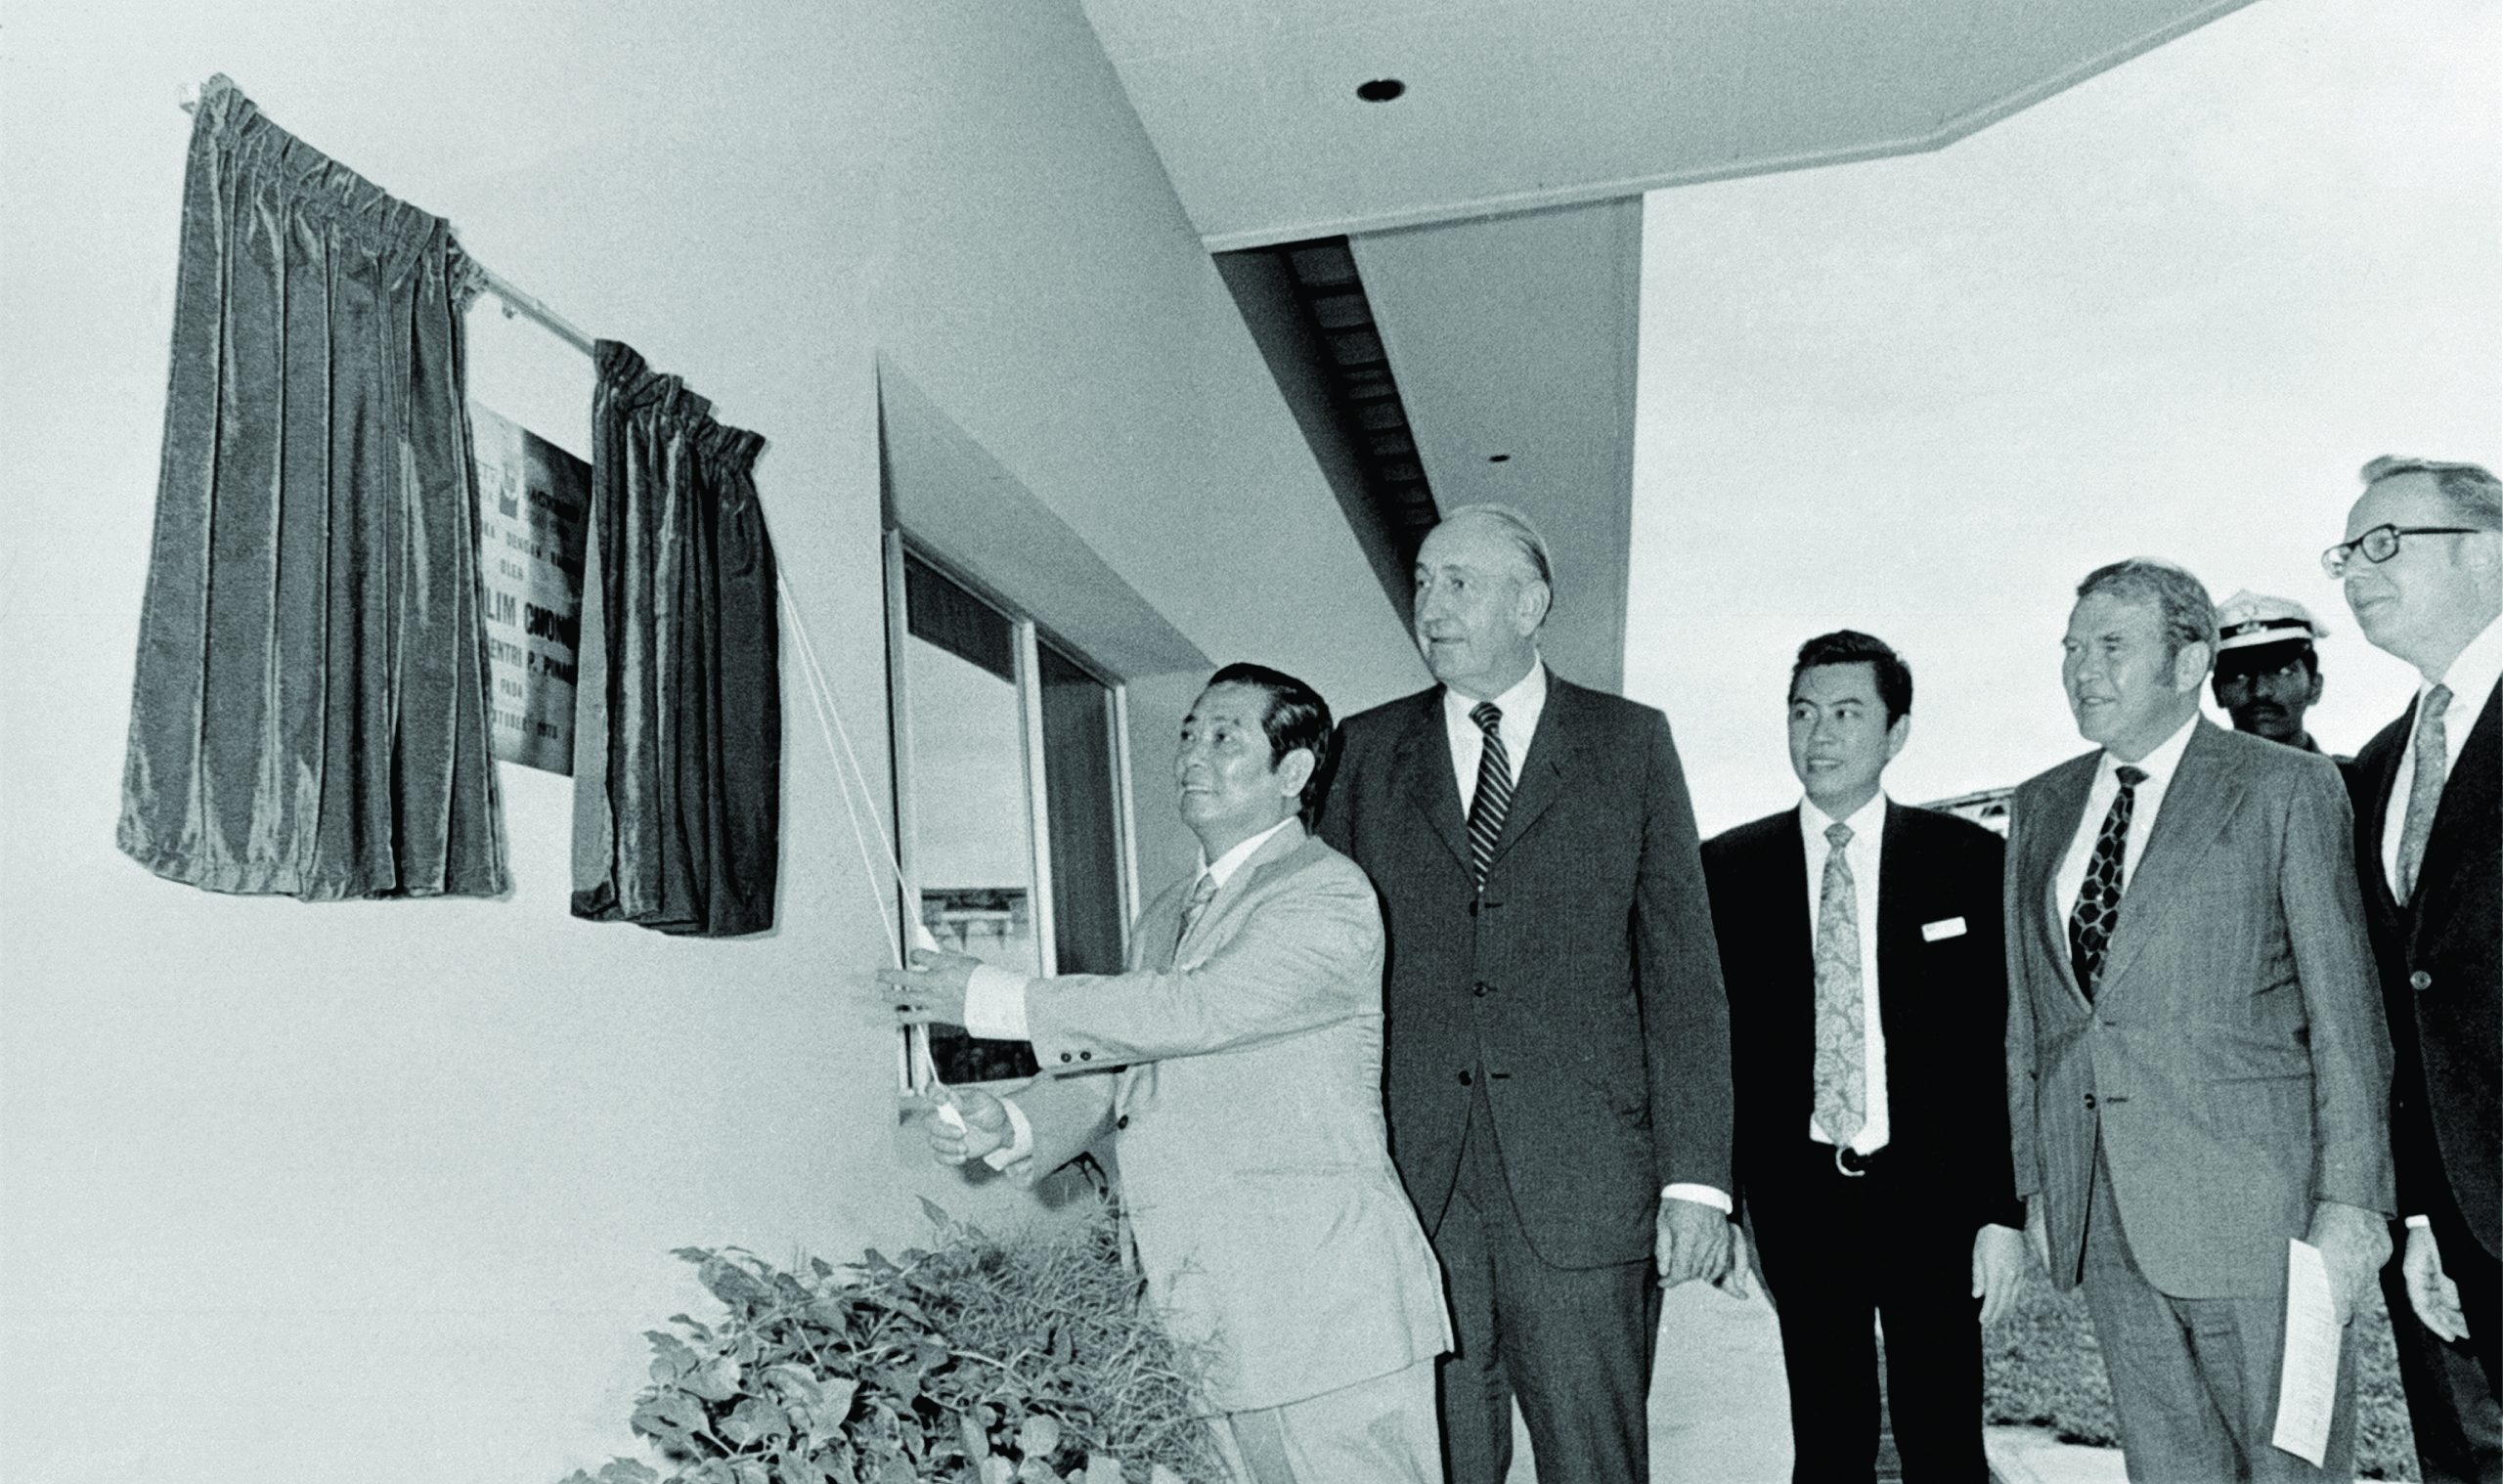 Bill Hewlett, Dave Packard and other men during the unveiling of a sign at Hewlett-Packard Malaysia in 1972.